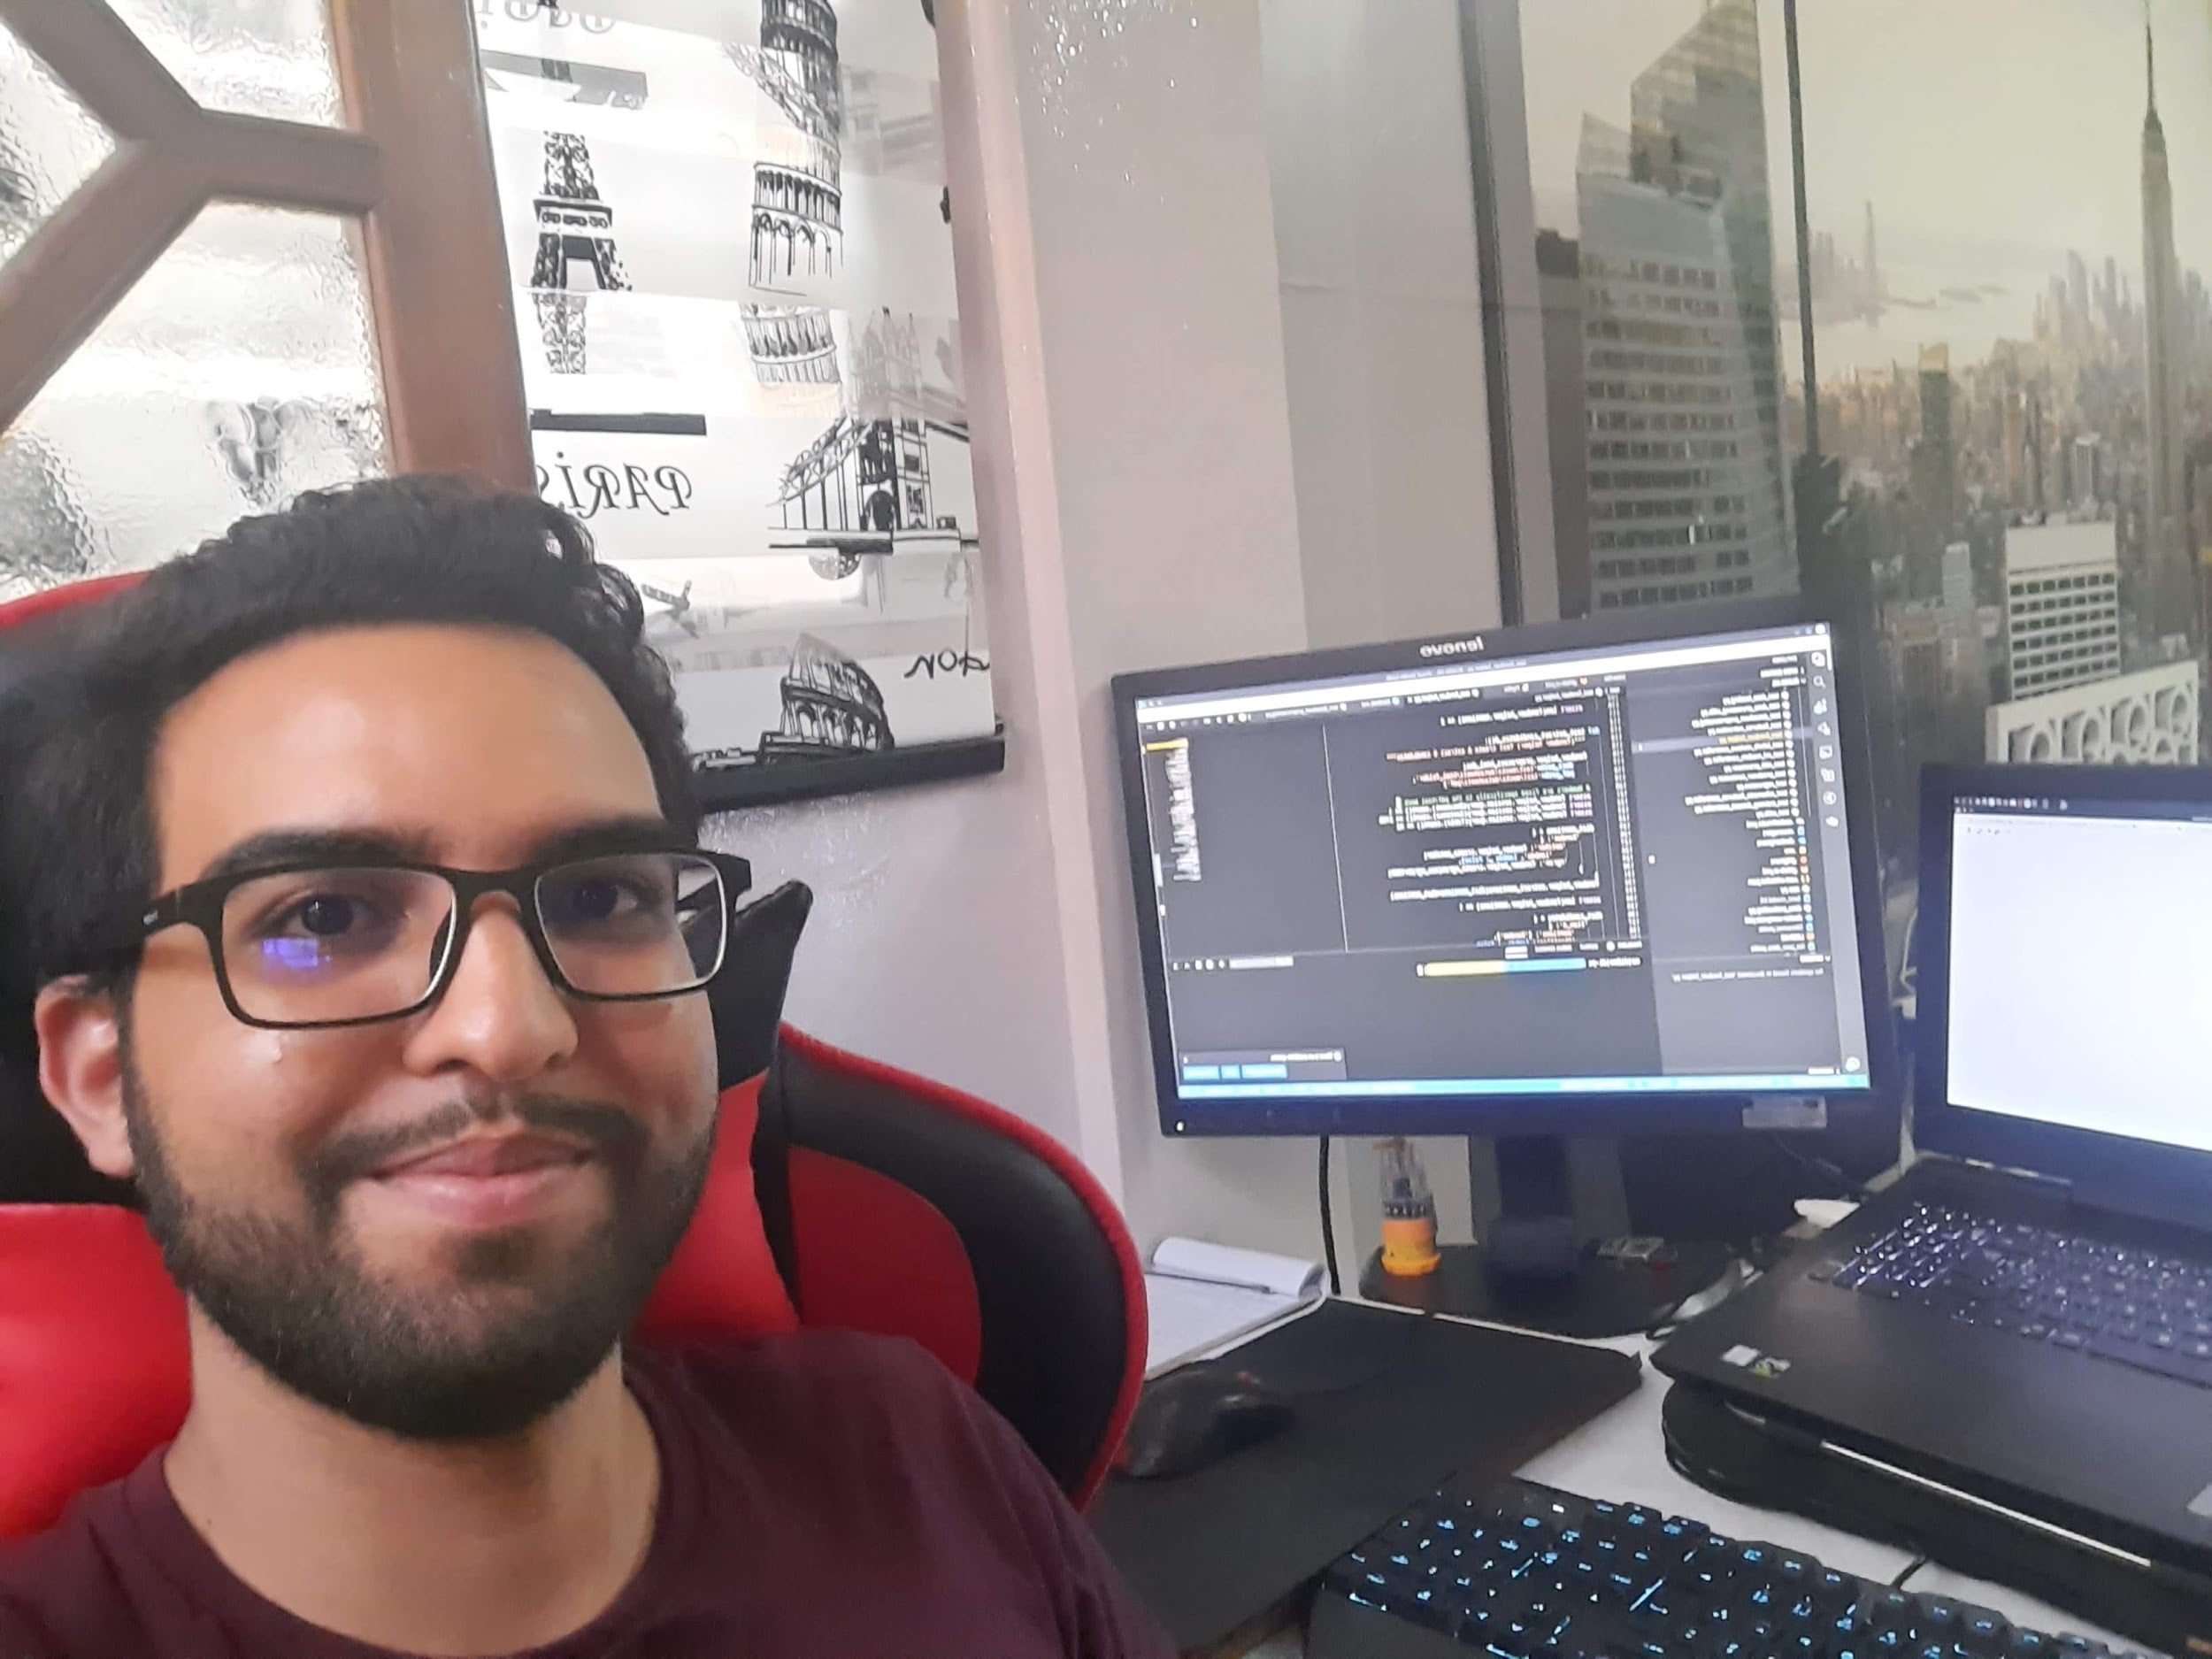 Wajdi in front of his desk